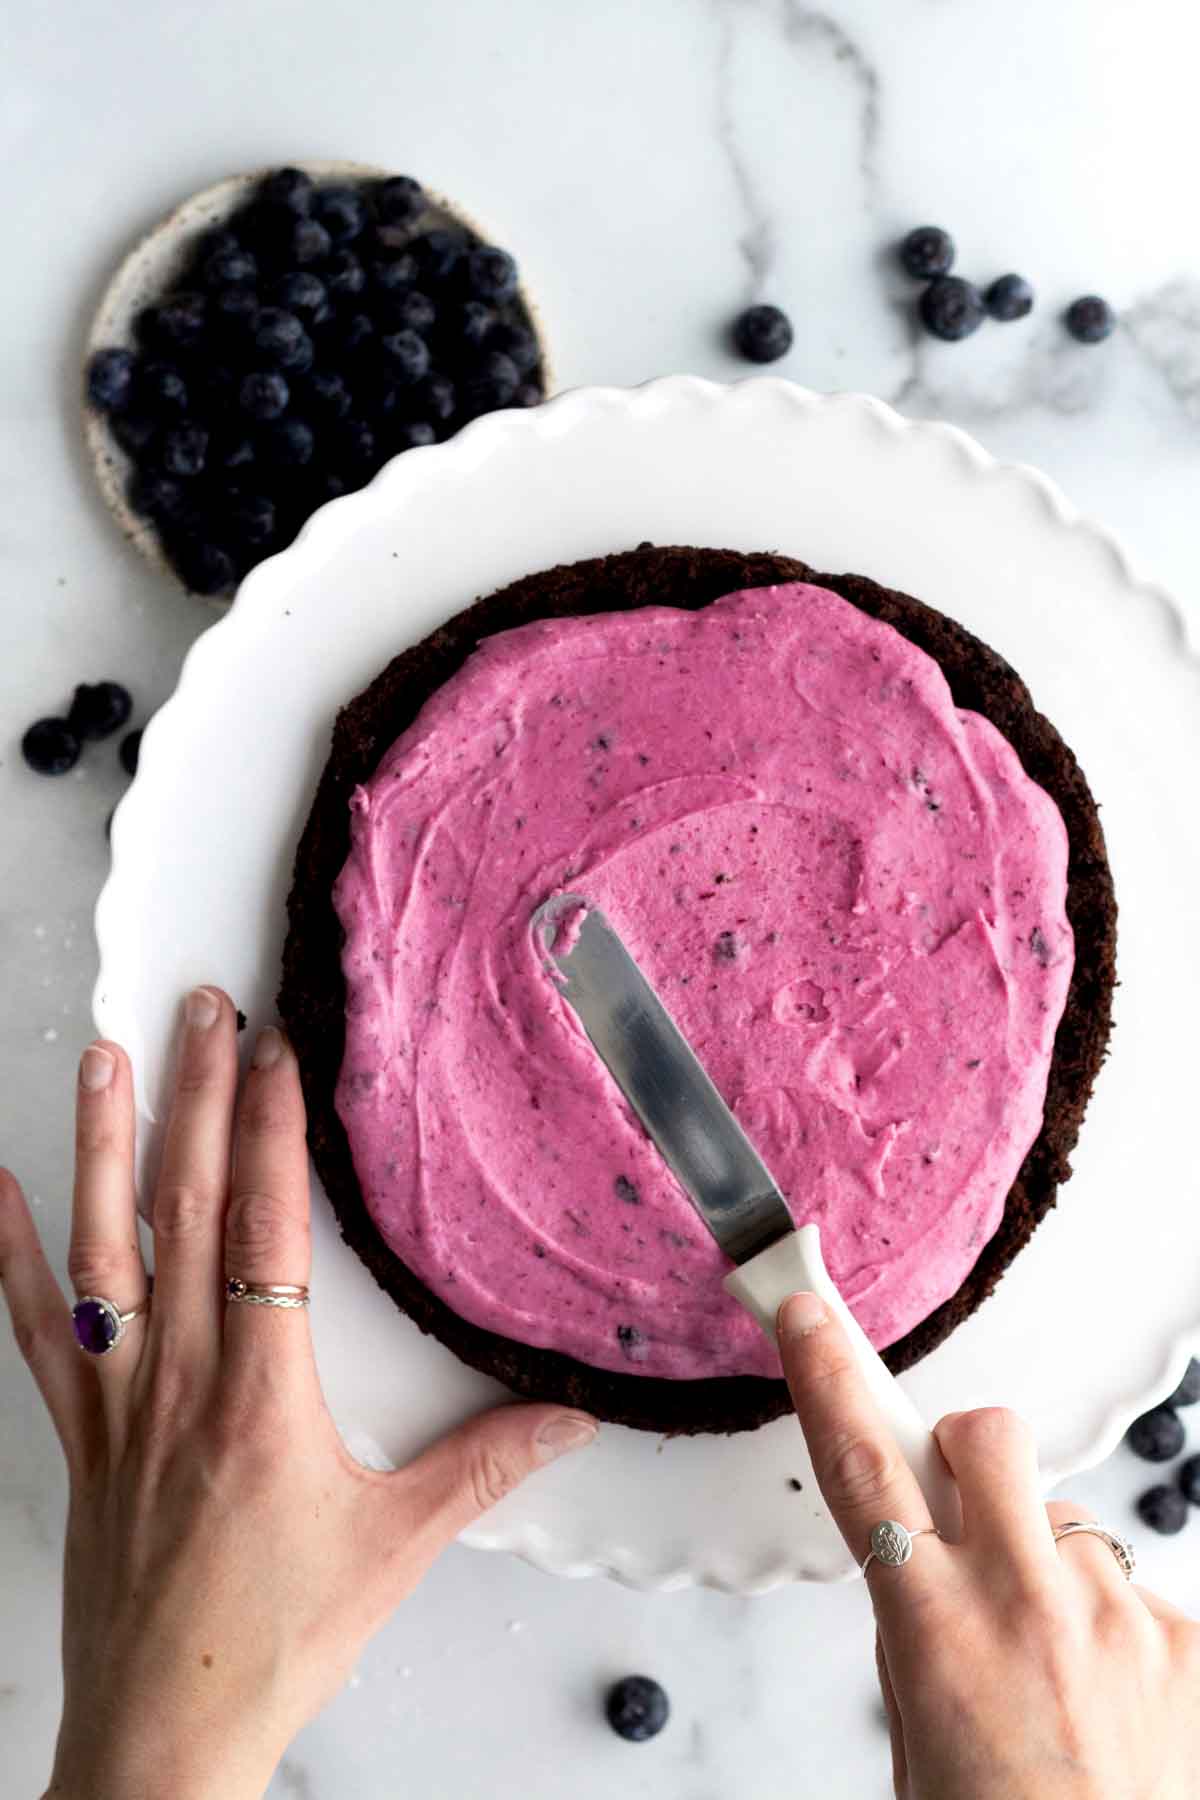 Hands spreading blueberry frosting on a chocolate cake with a spatula.